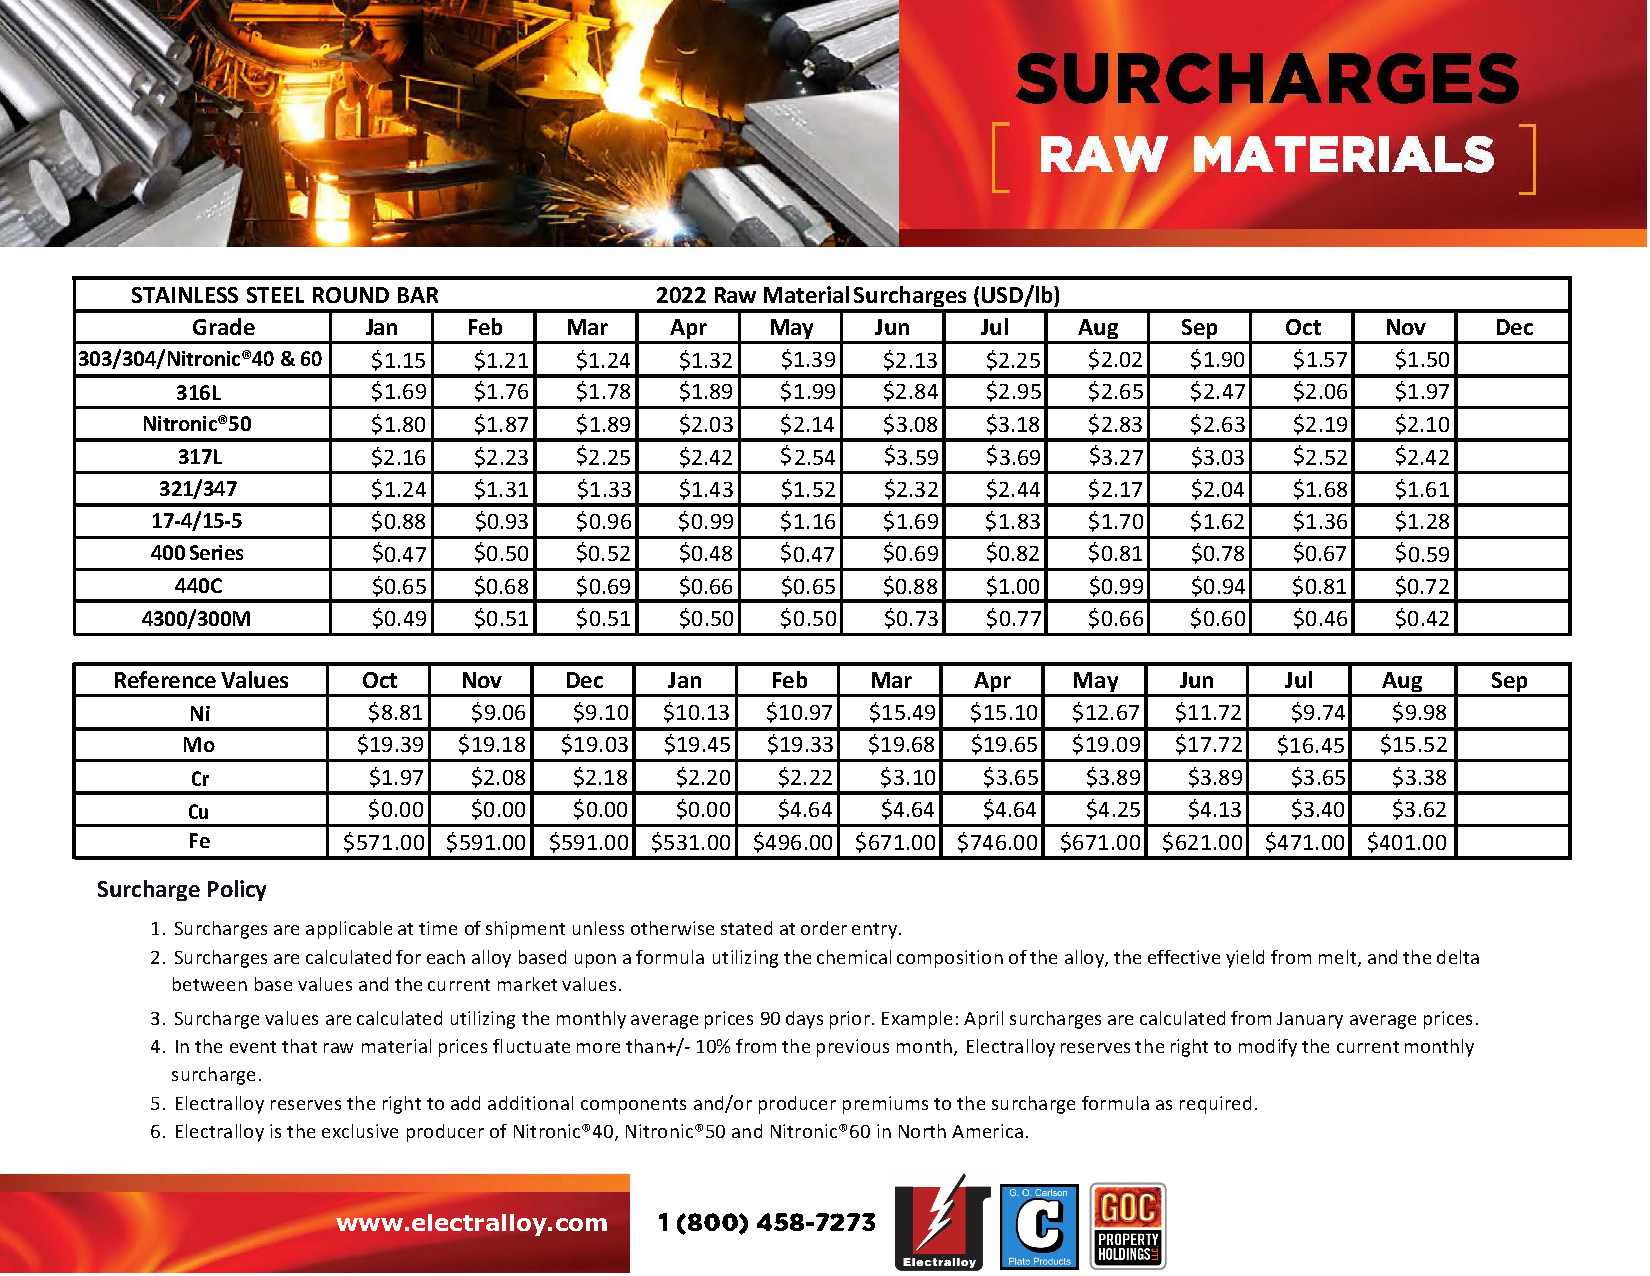 SURCHARGES STAINLESS STEEL ROUND BAR